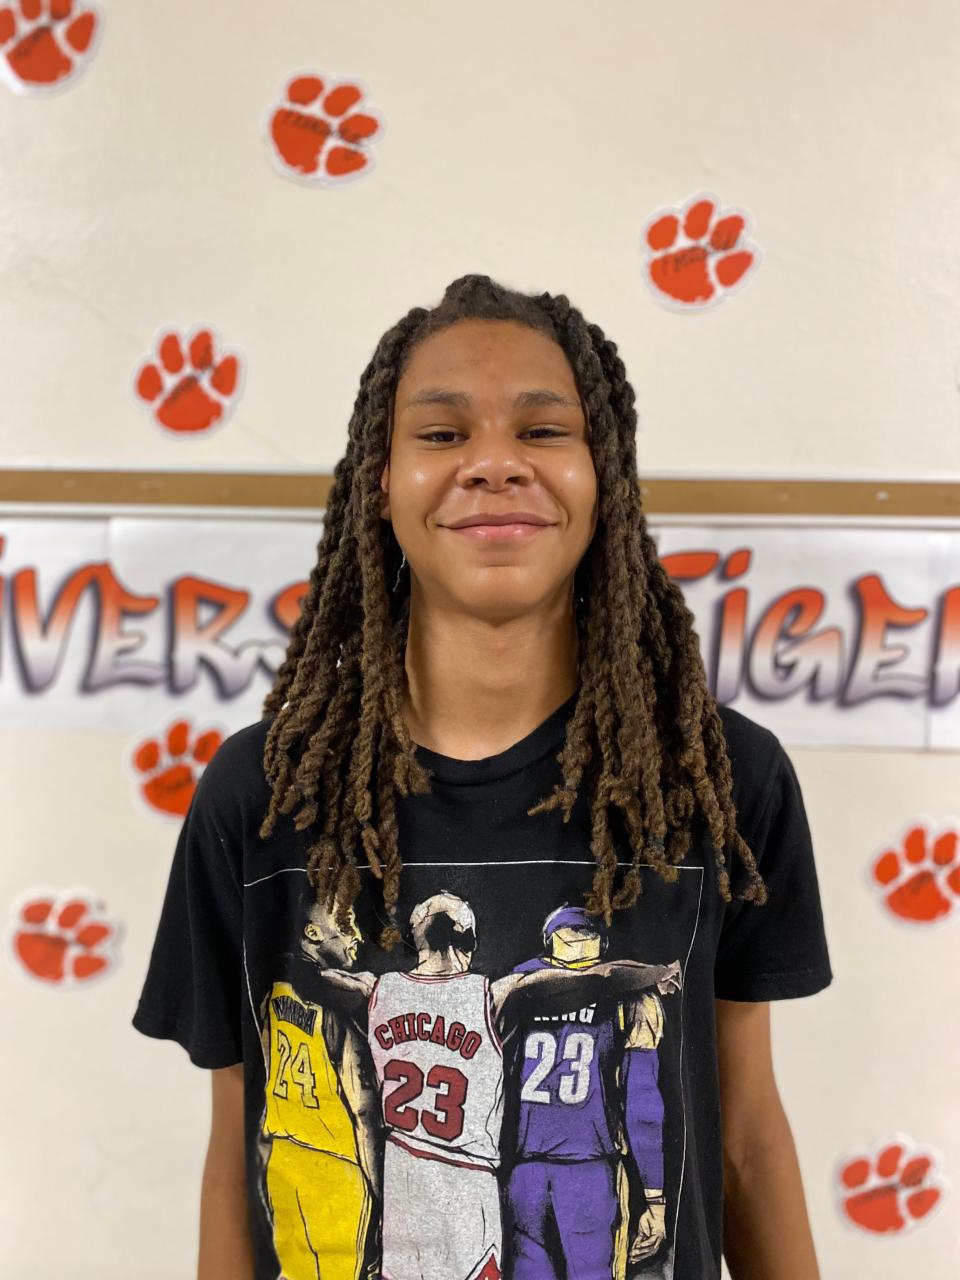 Tenth grader Donavan Coleman won third place in the 2022 Dr. Martin Luther King, Jr. Writing Contest. "I have a way to hypothetically stop violence. I would take them to better environments, give them better teachers and better schools. Almost like giving them a reason to go to school," he wrote.